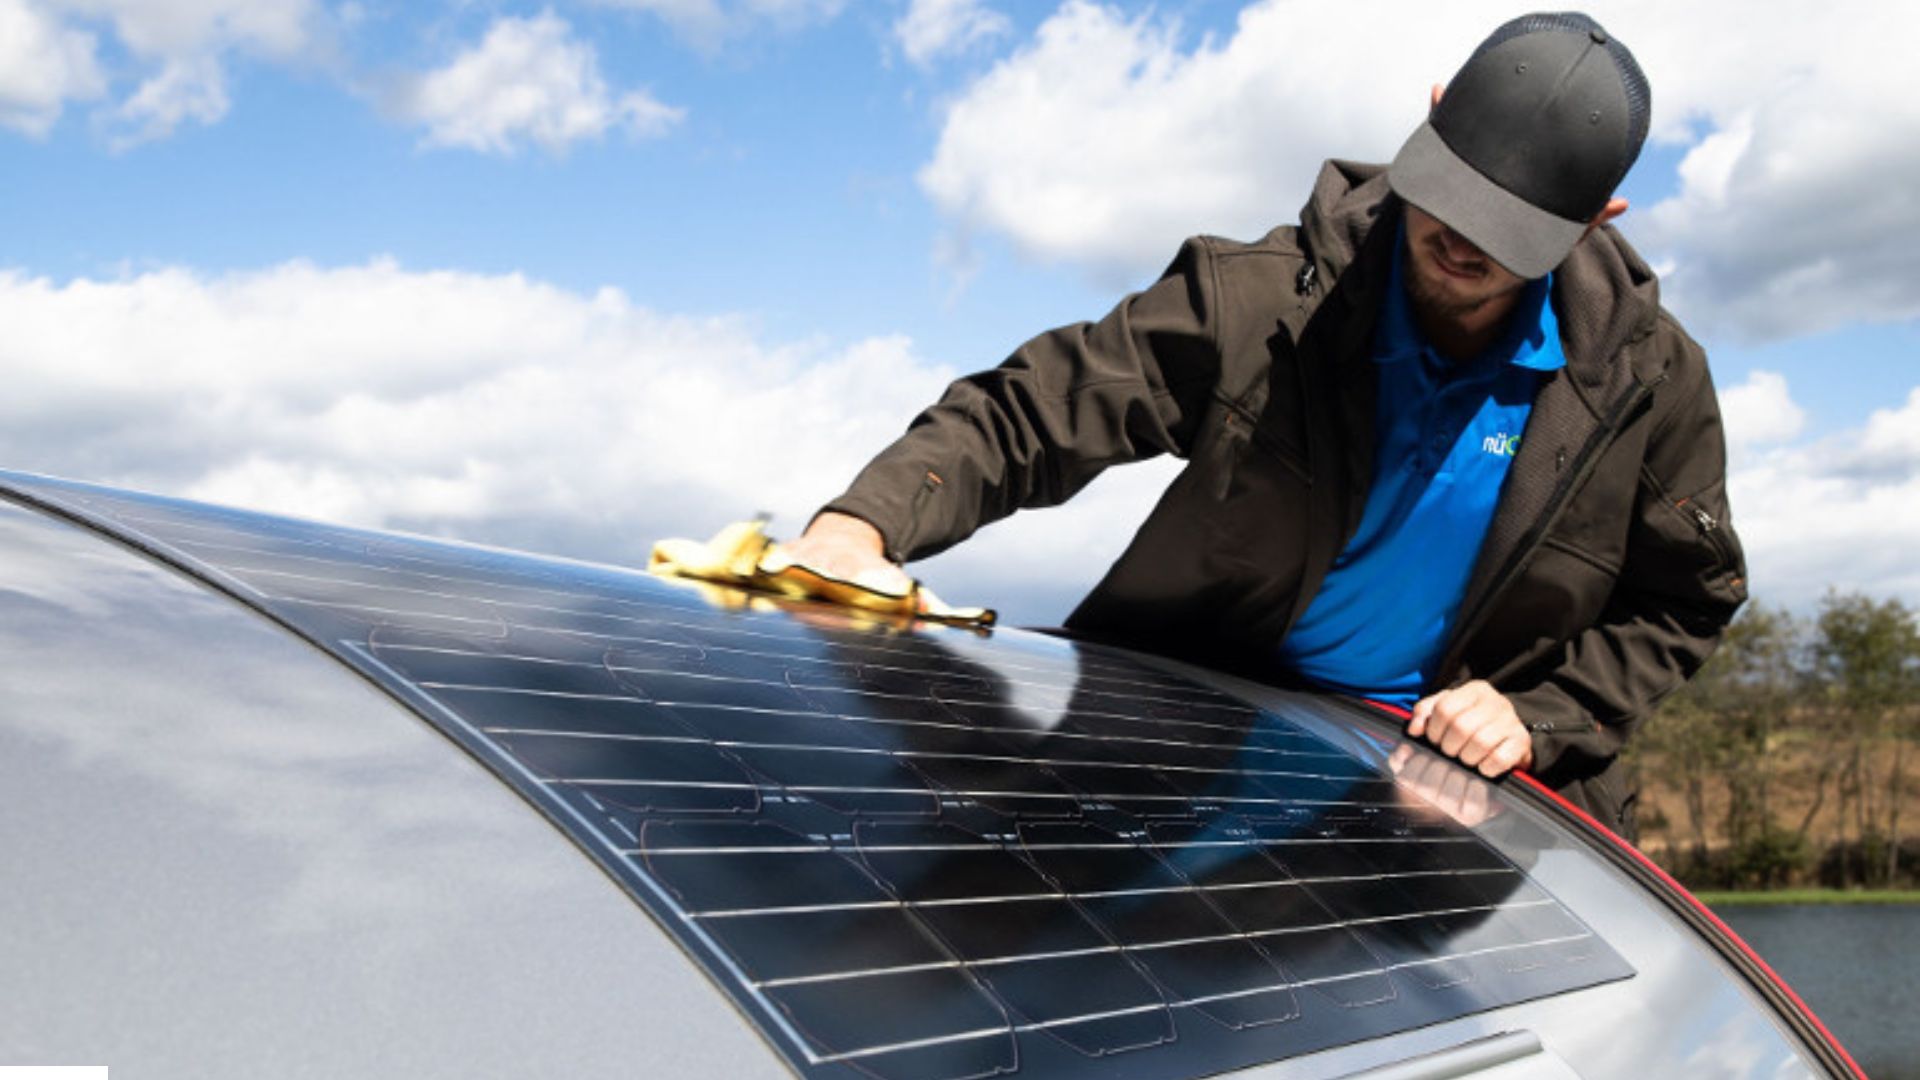 A technician in a black cap and jacket is cleaning flexible solar panel installed on a curved surface under a partly cloudy sky.